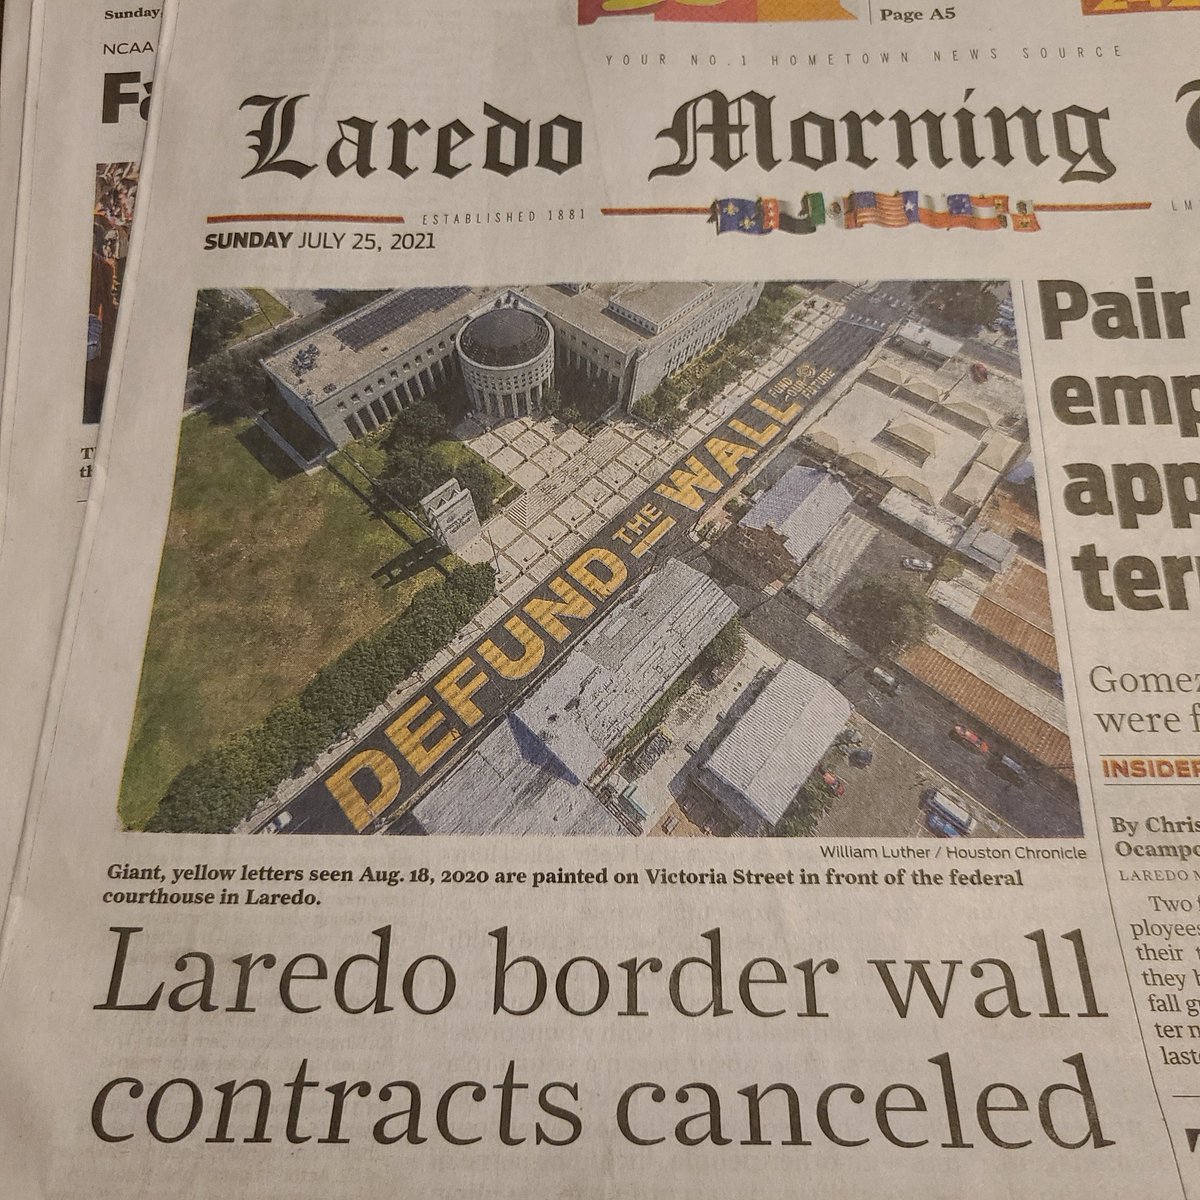 If you haven't seen today's print edition of the Laredo Morning Times, make sure to grab a copy before the day is over!

We made history, Ya'll! And it's only the beginning...

#DefundtheWall 
#FundOurFuture 
#NoBorderWall 
#NotAnotherFoot